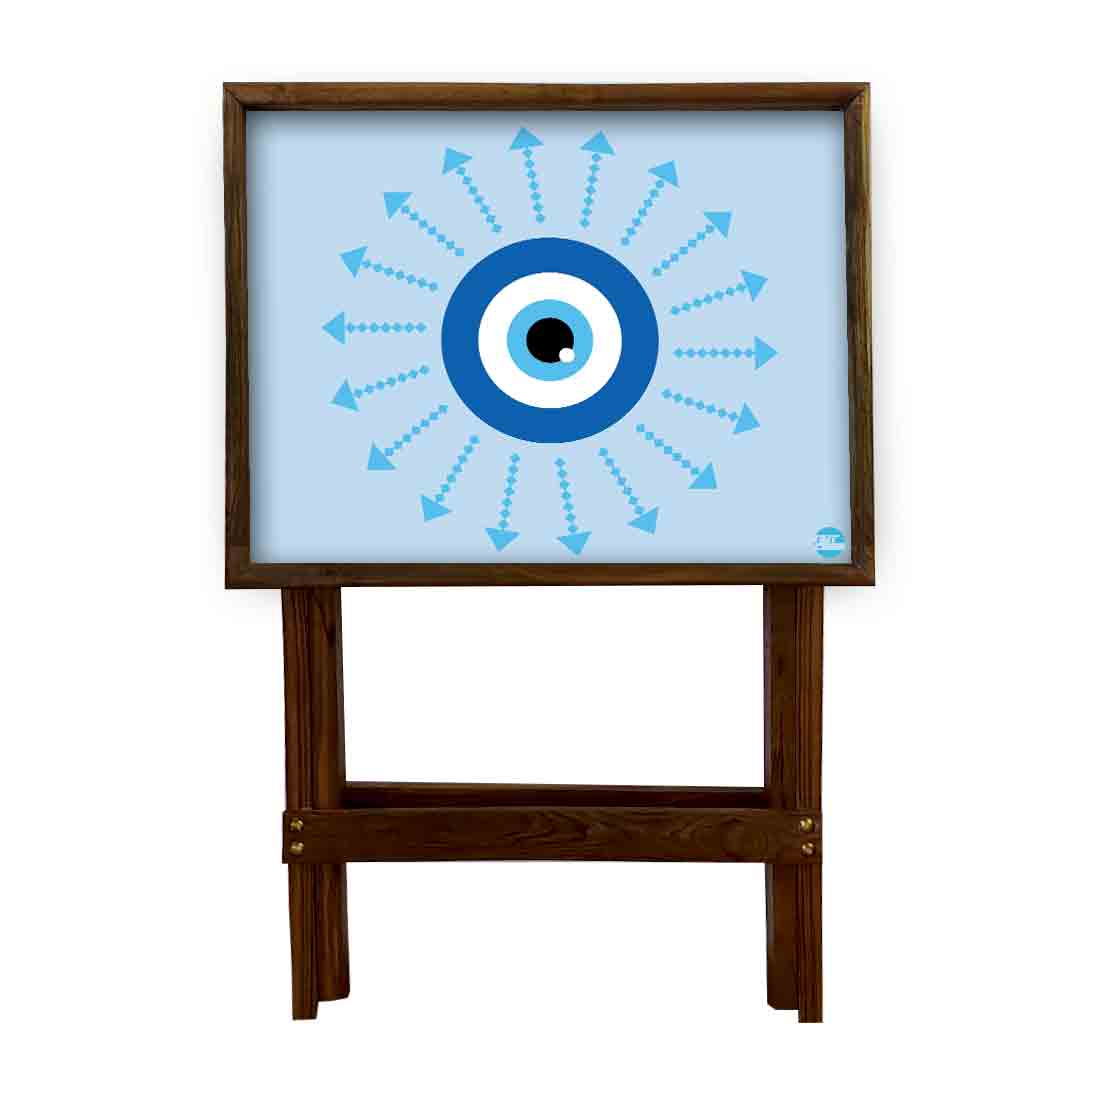 Folding TV Tray Table for Eating Breakfast Serving Table - Evil Eye Protector Nutcase